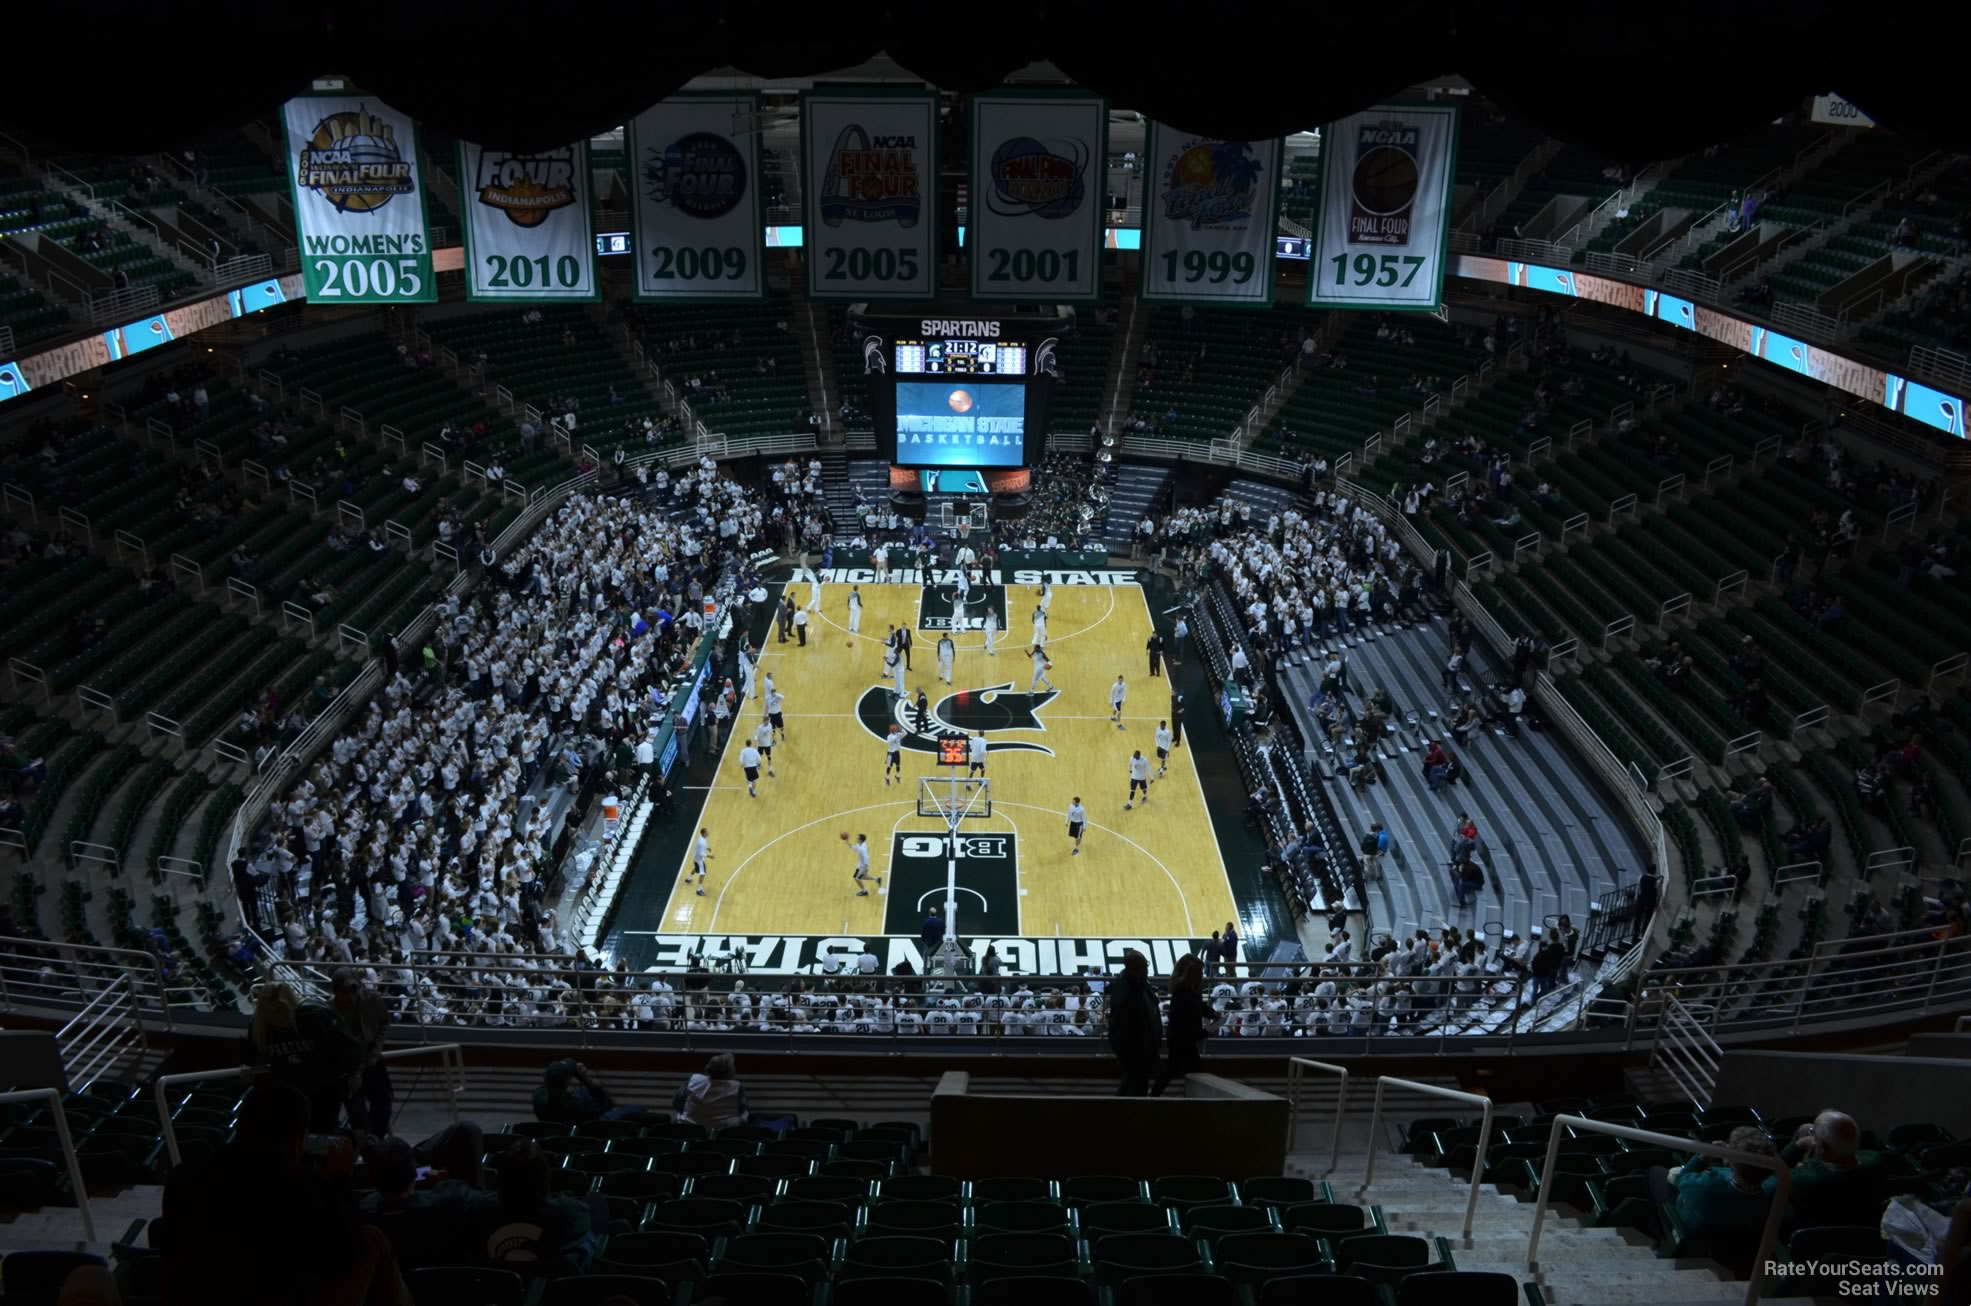 section 236, row 15 seat view  - breslin center